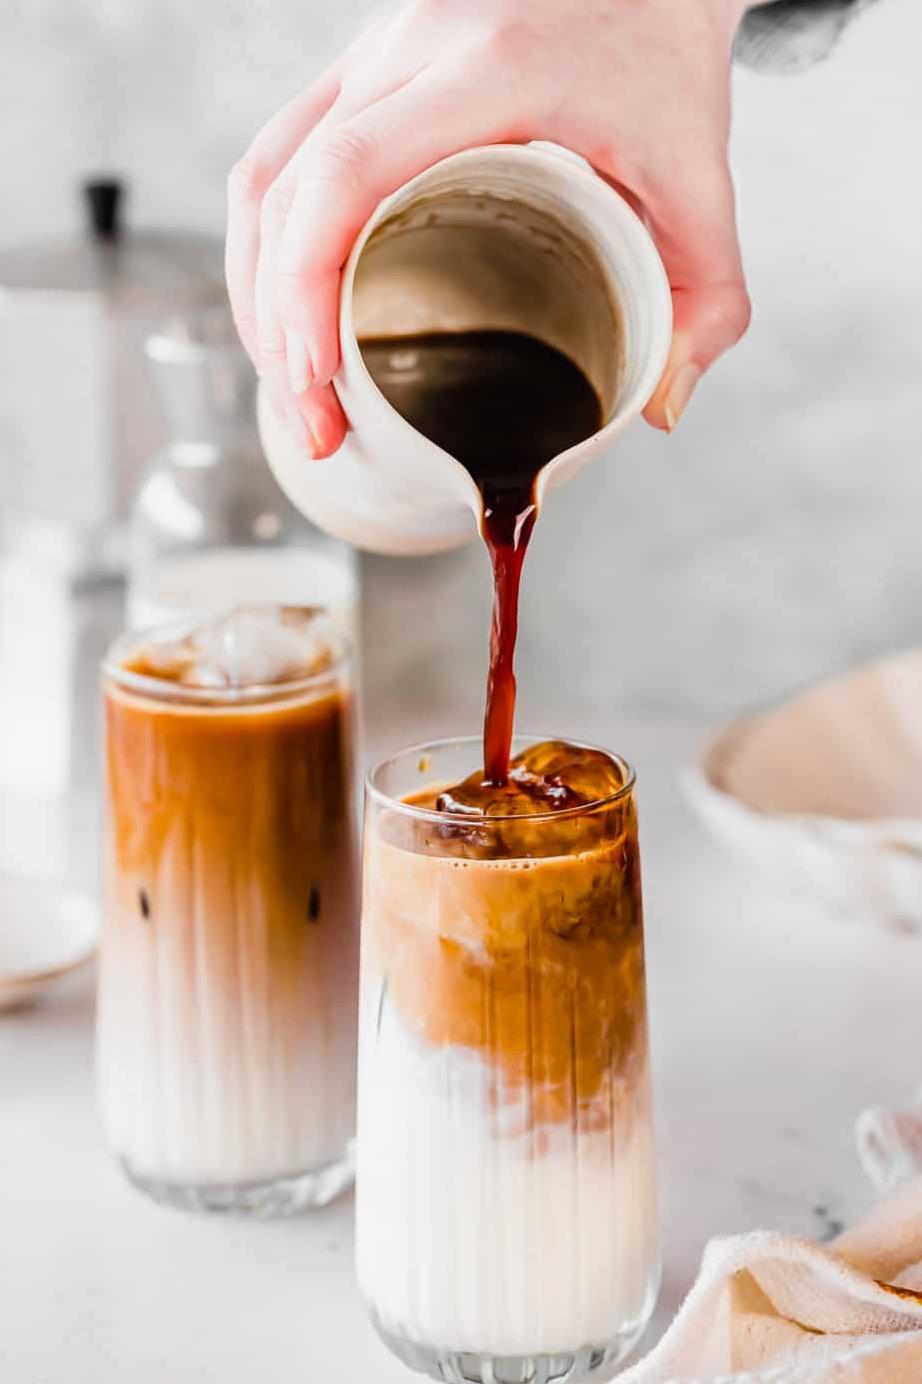  A popular drink among coffee lovers, this iced almond coffee is a must-try.